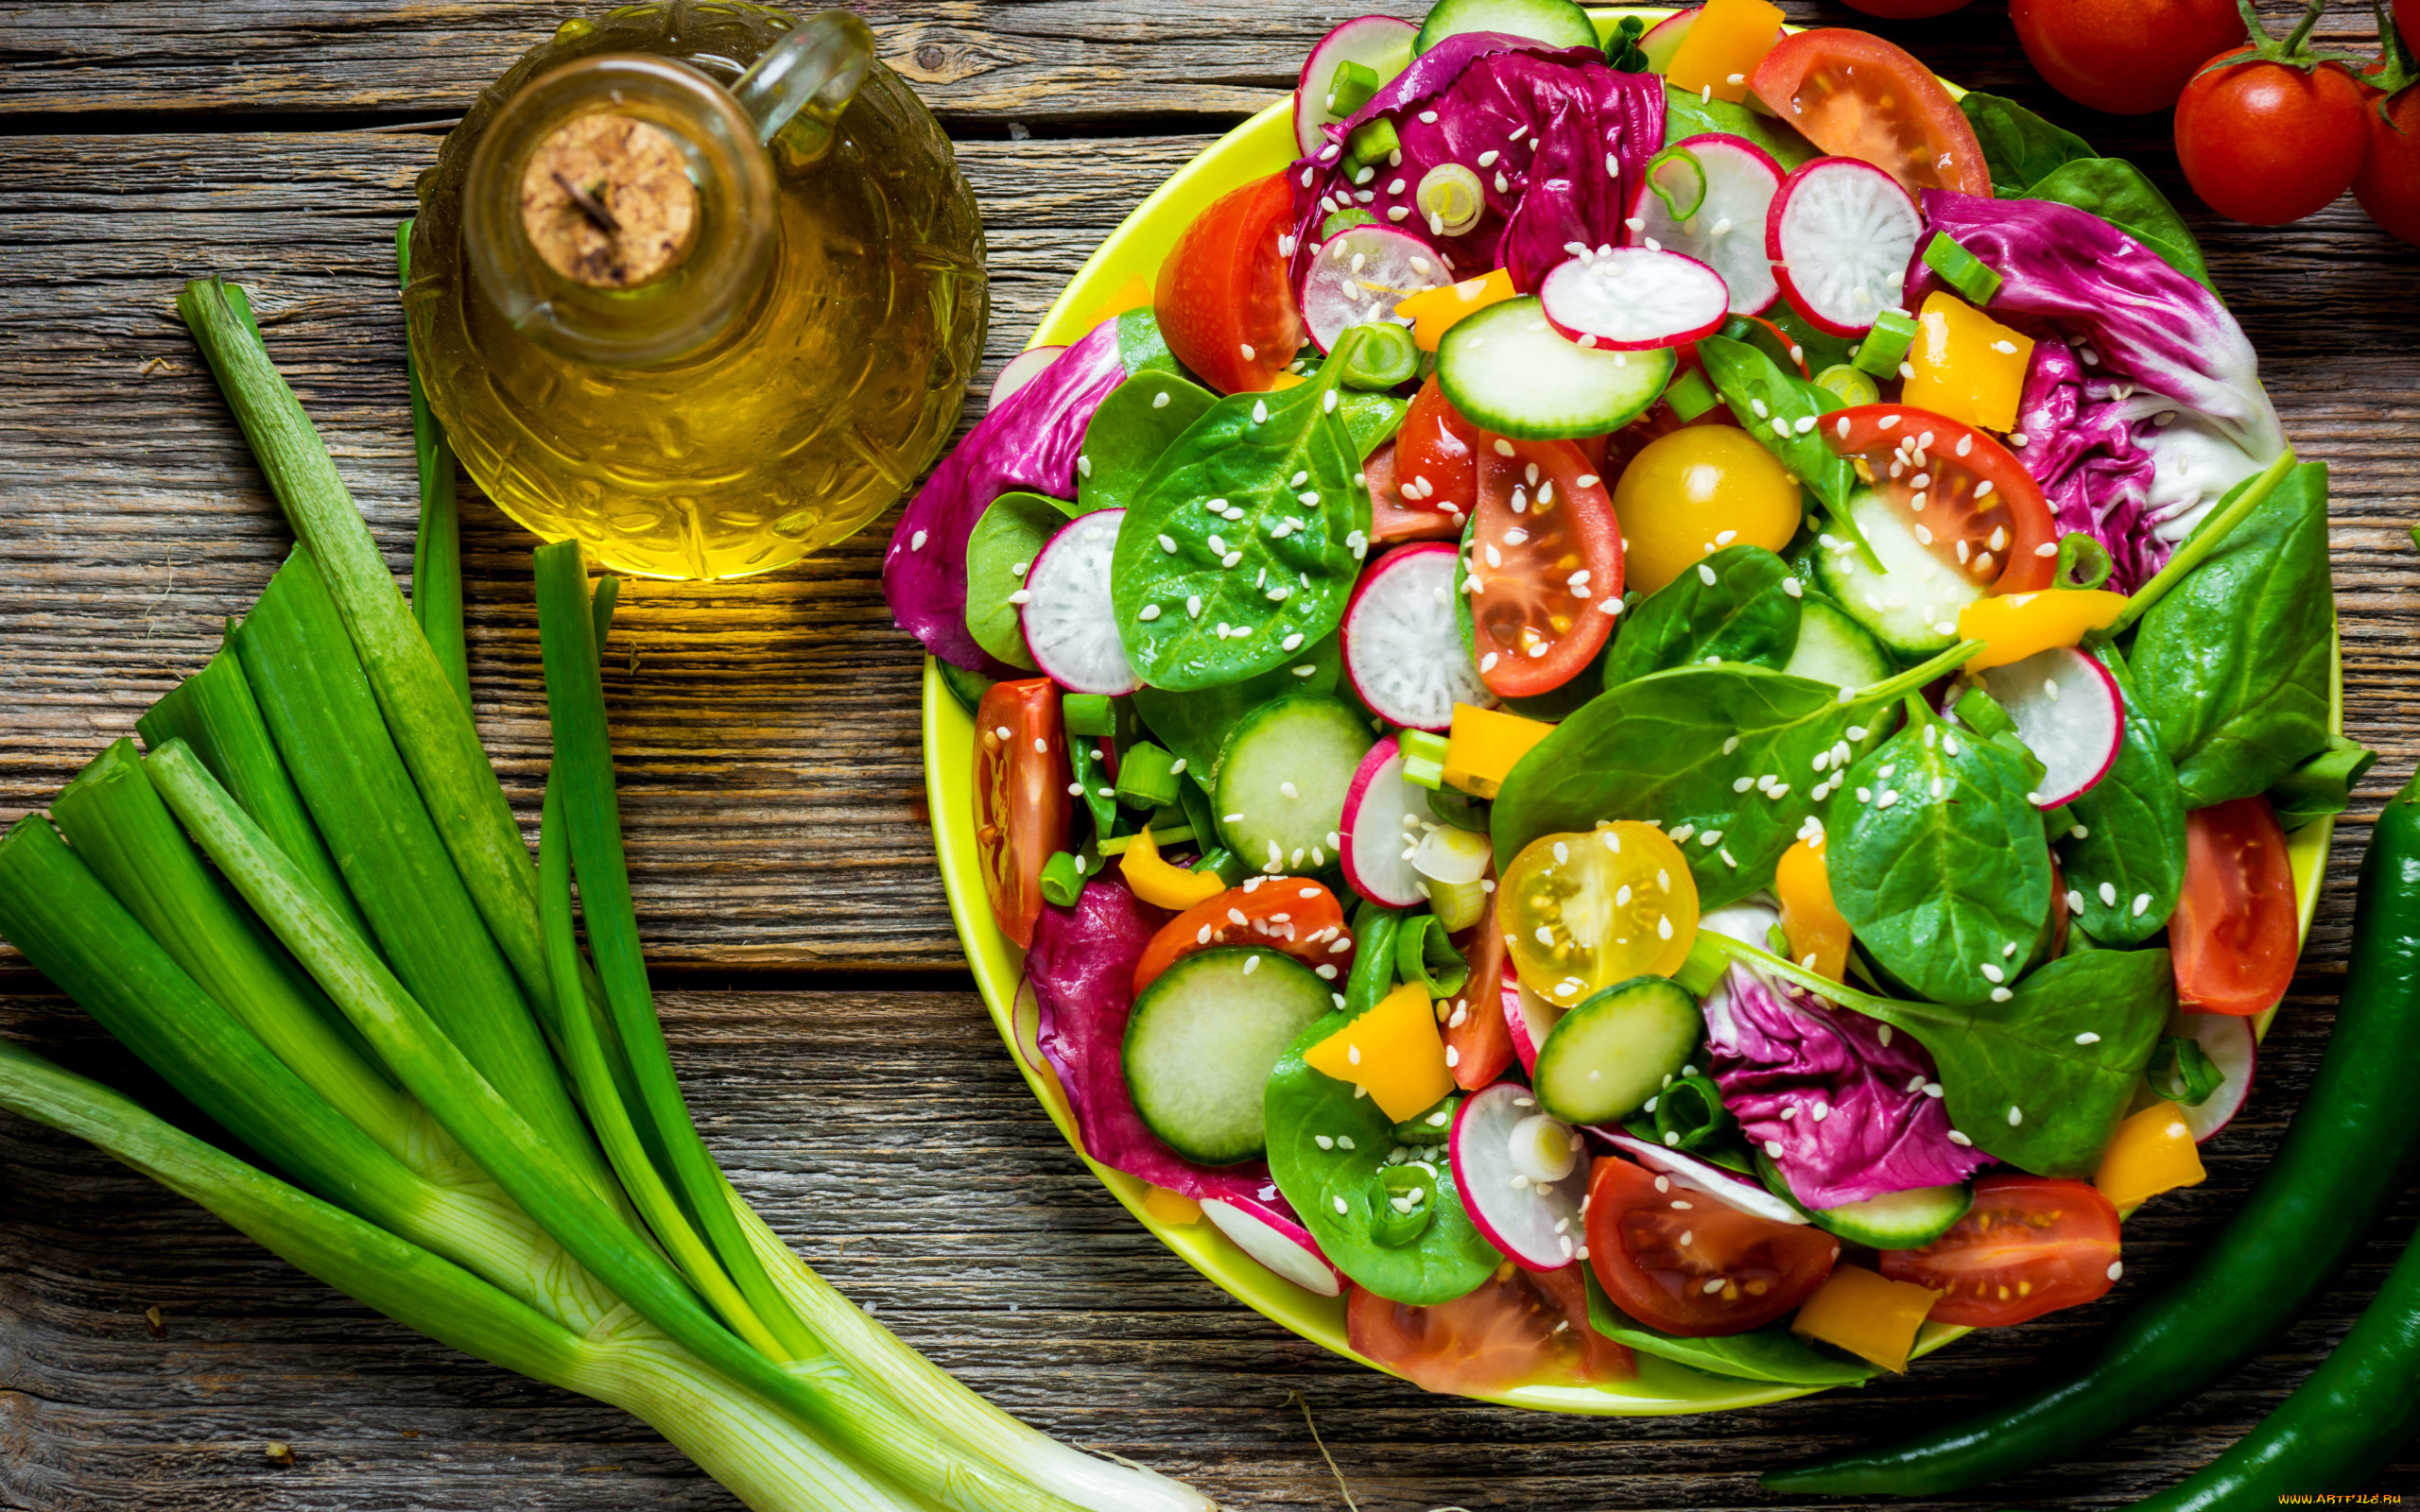 Food Colorful Salad Vegetables Olive Oil Radish Lettuce Seeds Wooden Surface Cucumbers 2560x1600